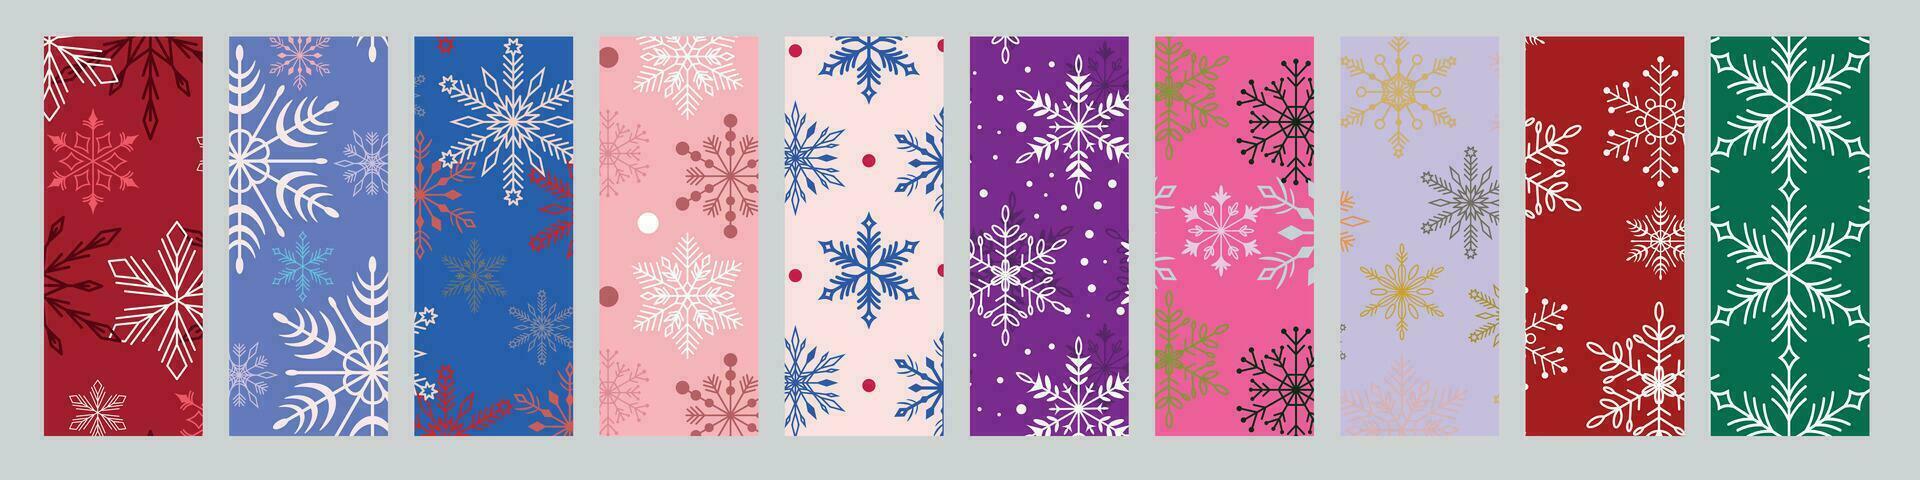 Set of seamless winter patterns for Christmas and New Year with snowflakes. Patterns on the swatch panel. vector